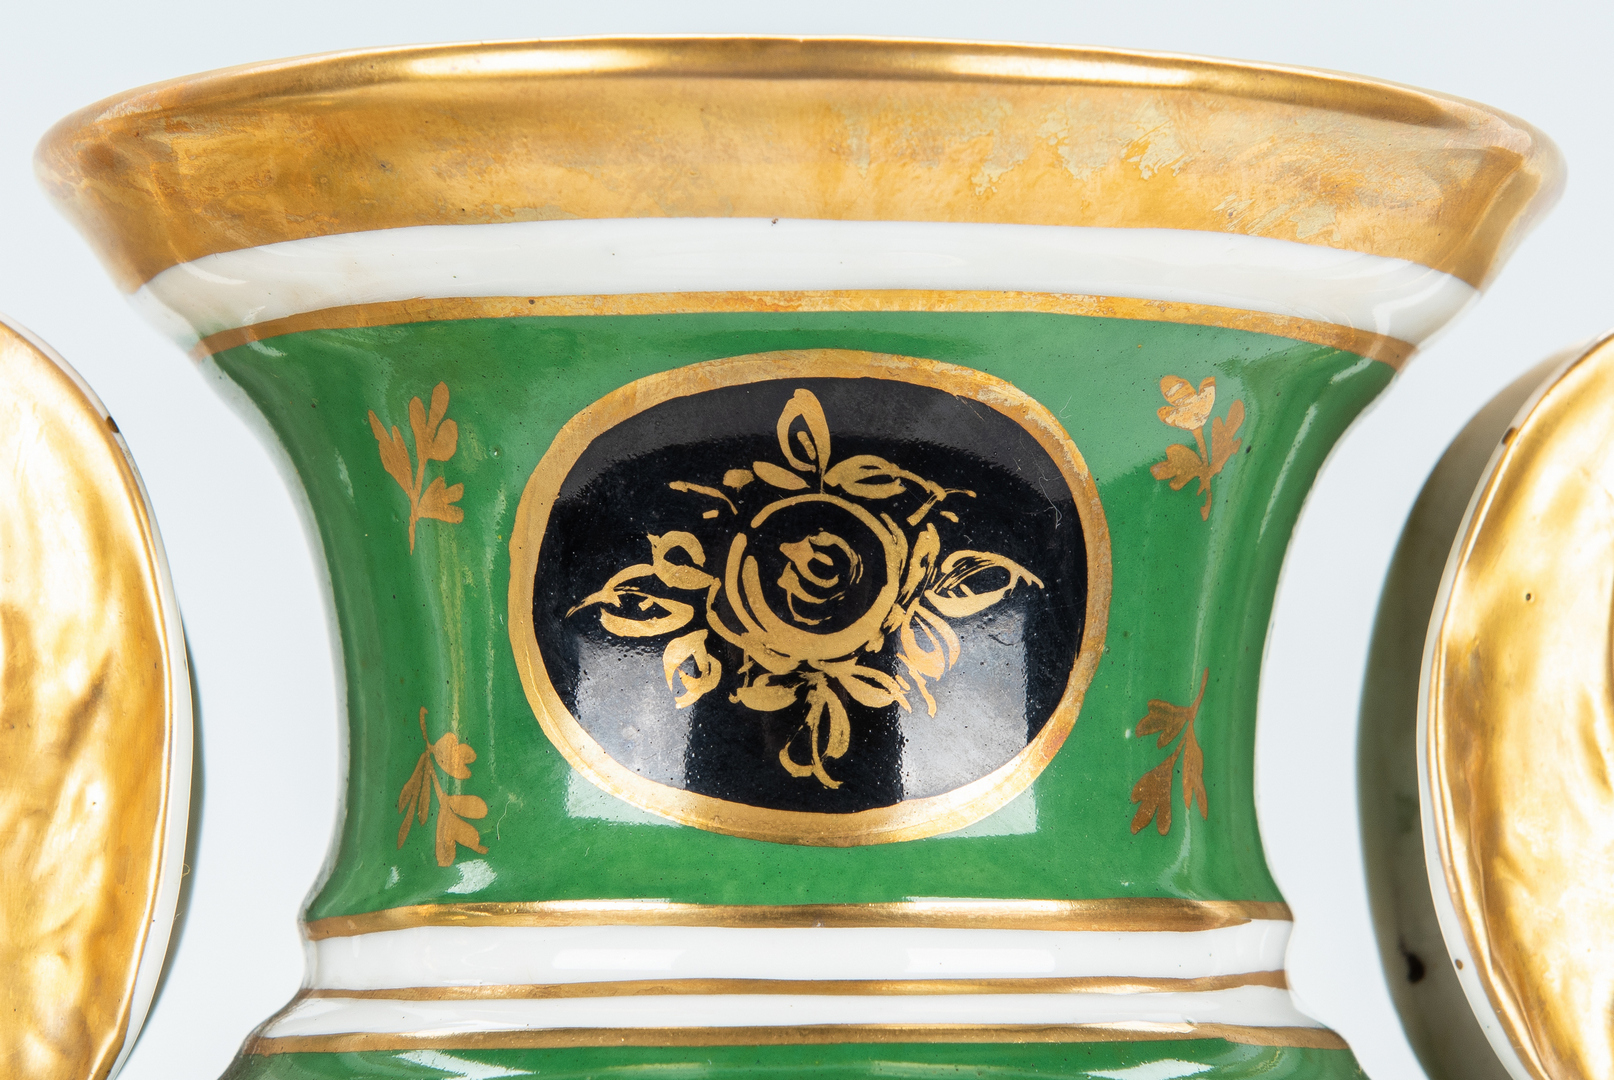 Lot 843: Pair of French Porcelain Urns